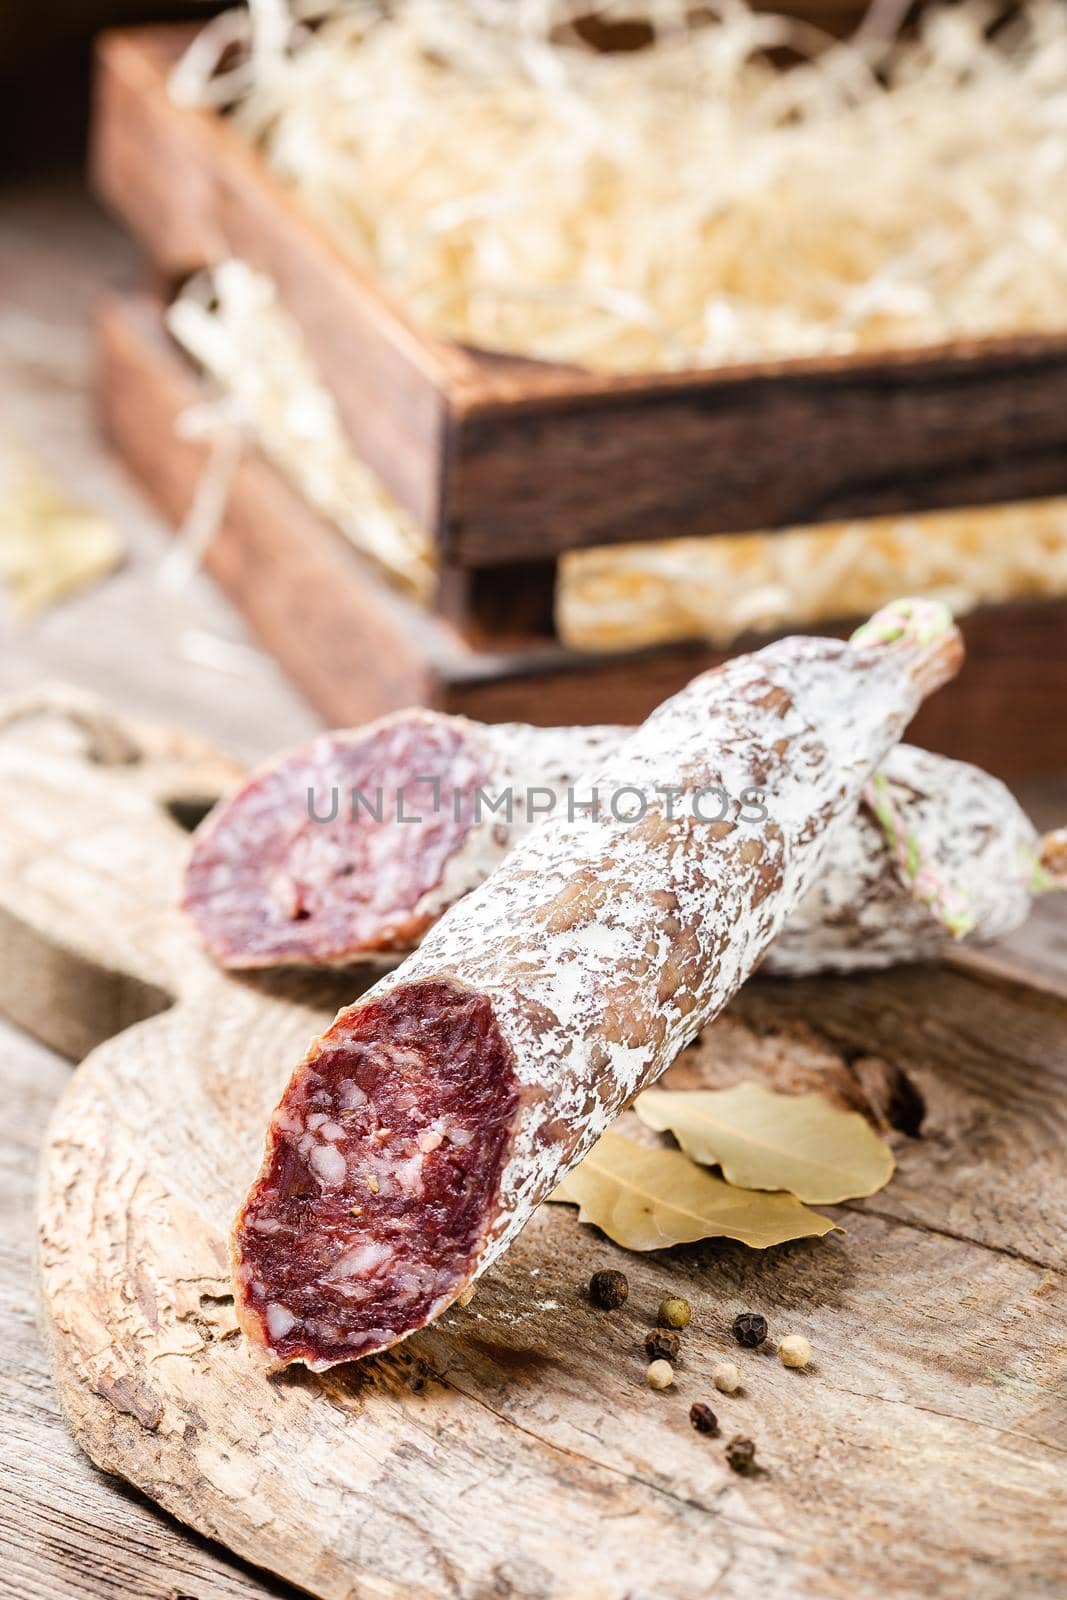 Smoked sliced salami on a old wooden table by Syvanych